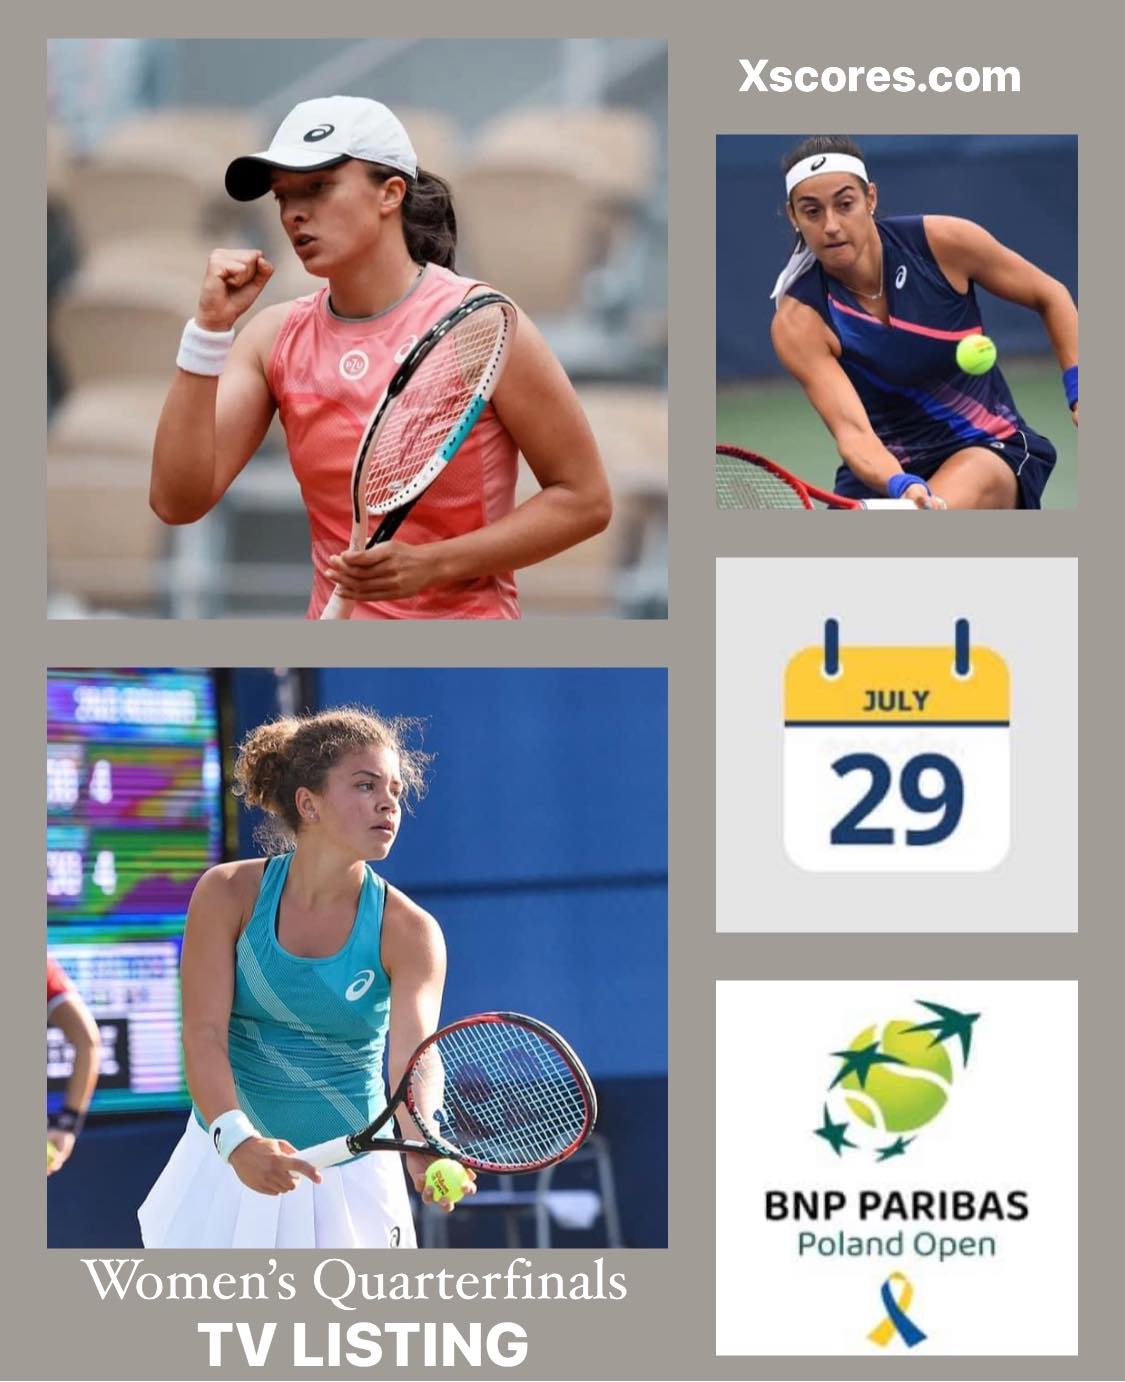 Tennis- WTA 250 - Surface Clay -BNP Paribas Poland Open, WARSAW, (July 25th - July 30th - Friday, 29th 2022. WOMENS SINGLES - QUARTERFINALS - News